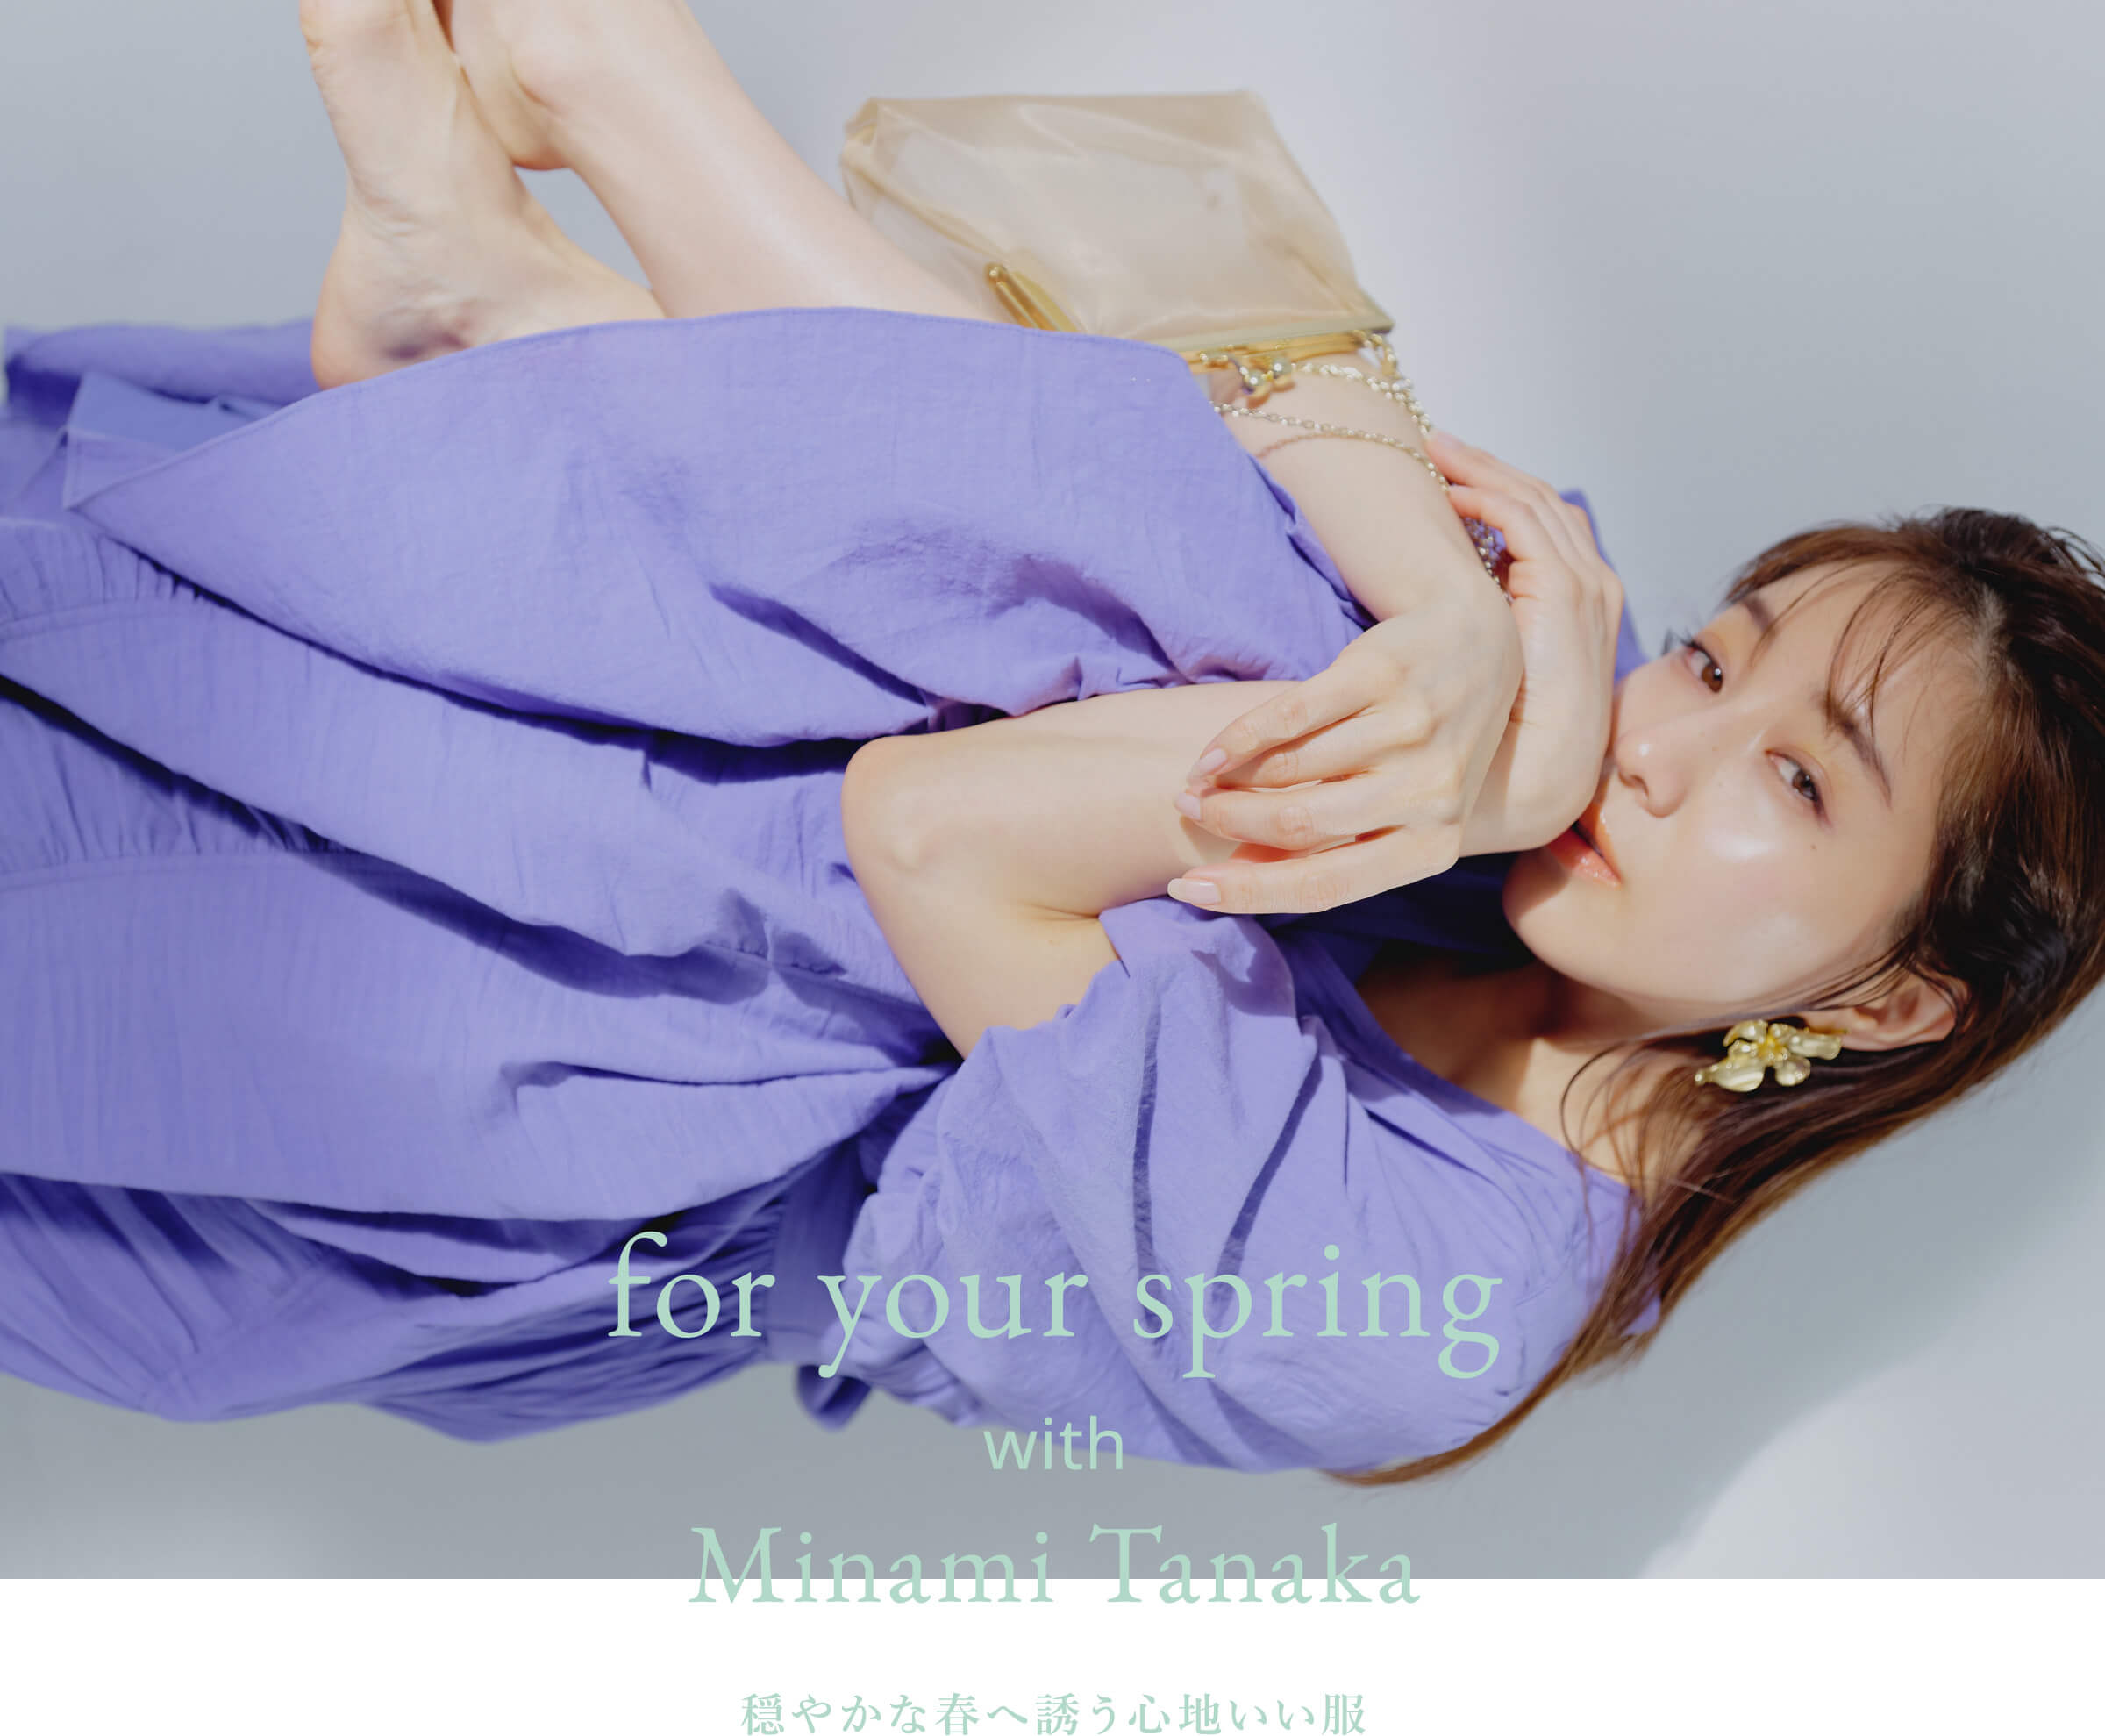 for your spring with Minami Tanaka 穏やかな春へ誘う心地いい服